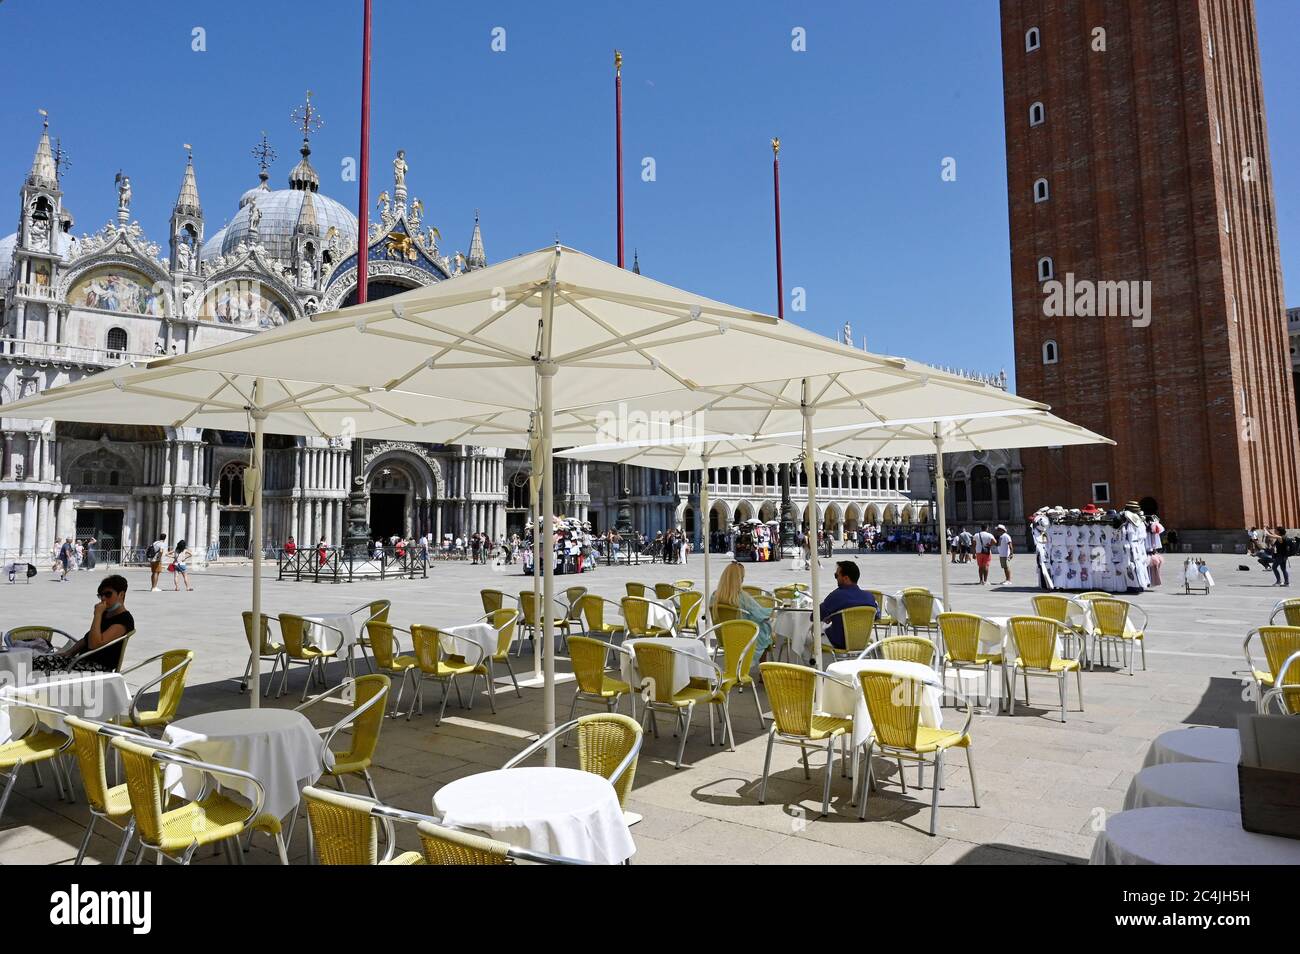 06/27/2020 Venice: umbrellas in Piazza San Marco to guarantee the distance Anti-crisis move of historic cafes. The managers assure: they will be the least impactful. But there is no lack of controversy. In San Marco square in Venice the first umbrellas were mounted that will cover the spaces in front of the premises, enlarged to facilitate the safe arrangement of the tables according to the safety rules on coronavirus. The first covers were set up in front of the Caffè Florian. Then the workers' teams moved on to Quadri, Lavena and will conclude at the Aurora and Chioggia cafes, in front of Pa Stock Photo